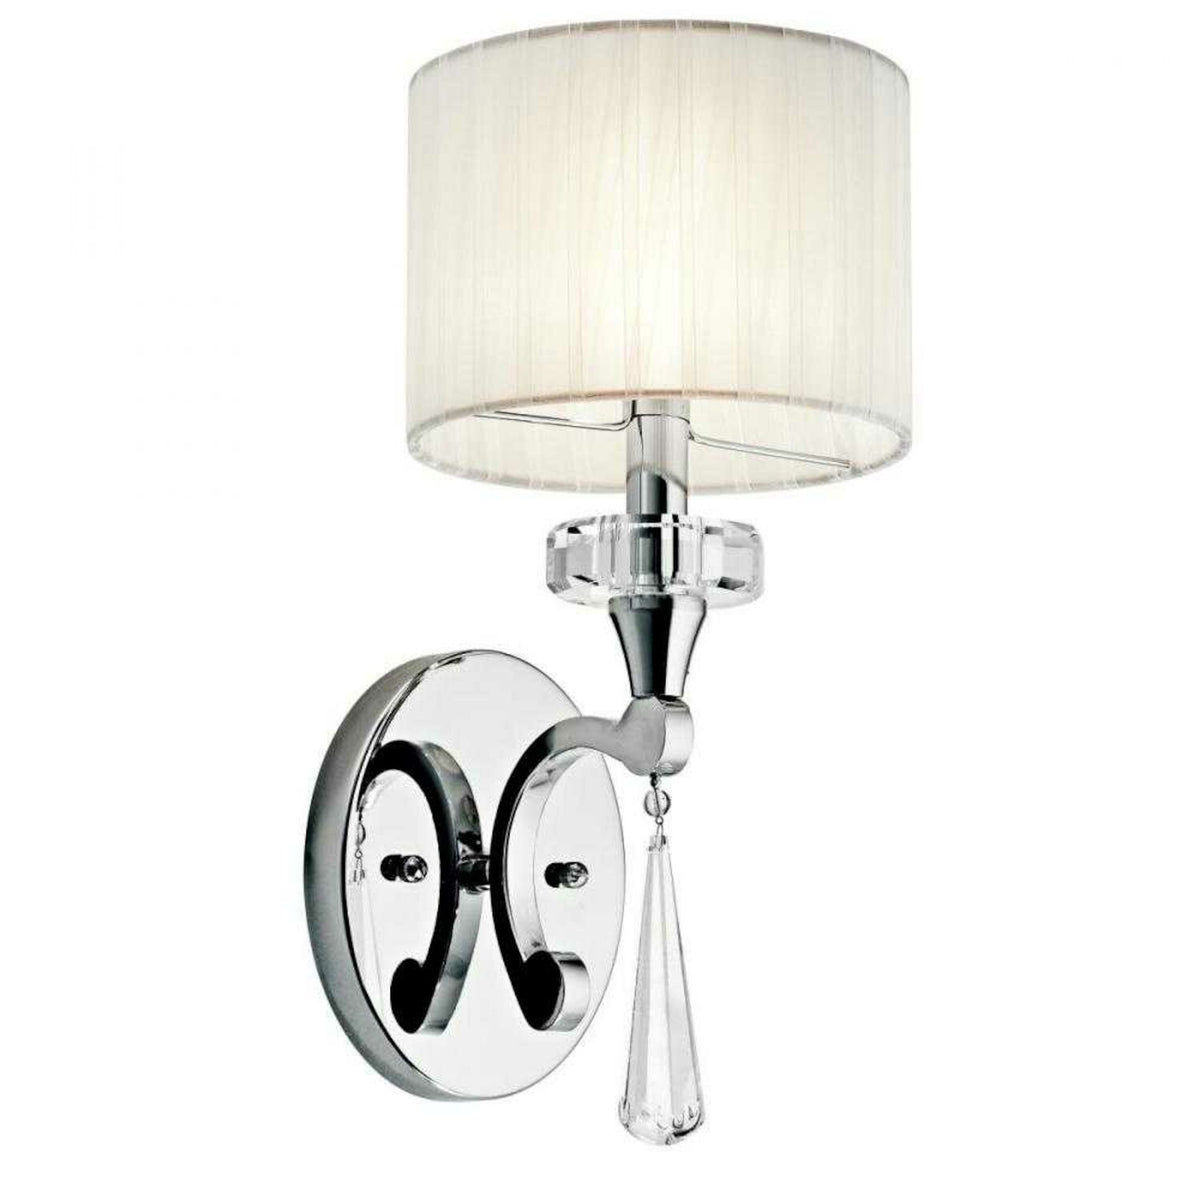 PARKER POINT 1-LIGHT WALL SCONCE